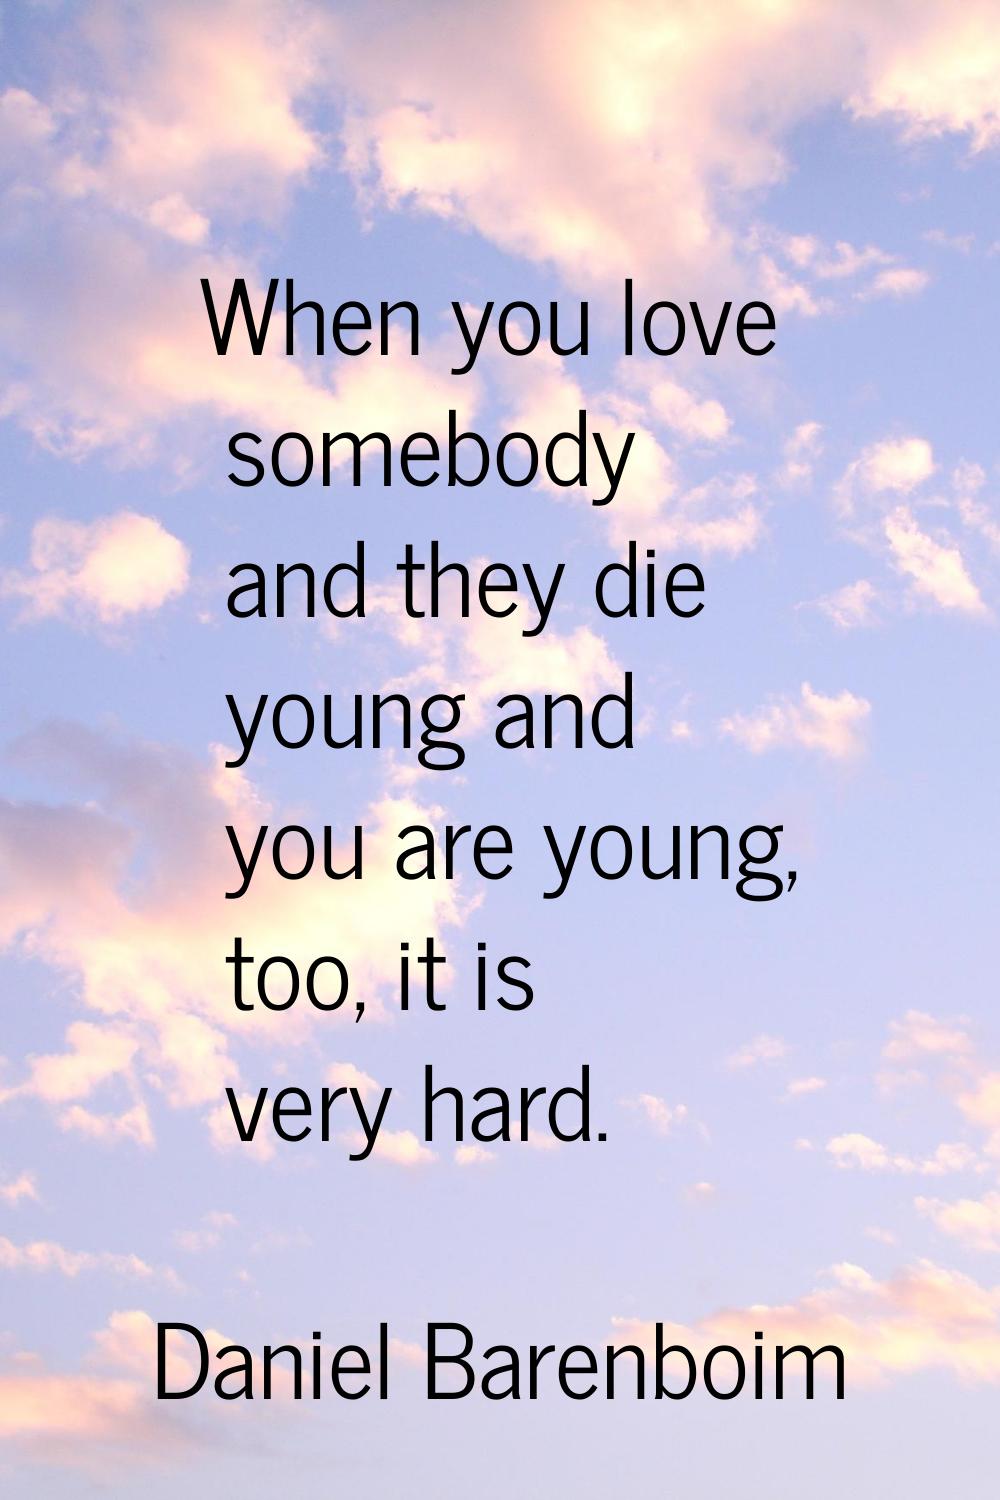 When you love somebody and they die young and you are young, too, it is very hard.